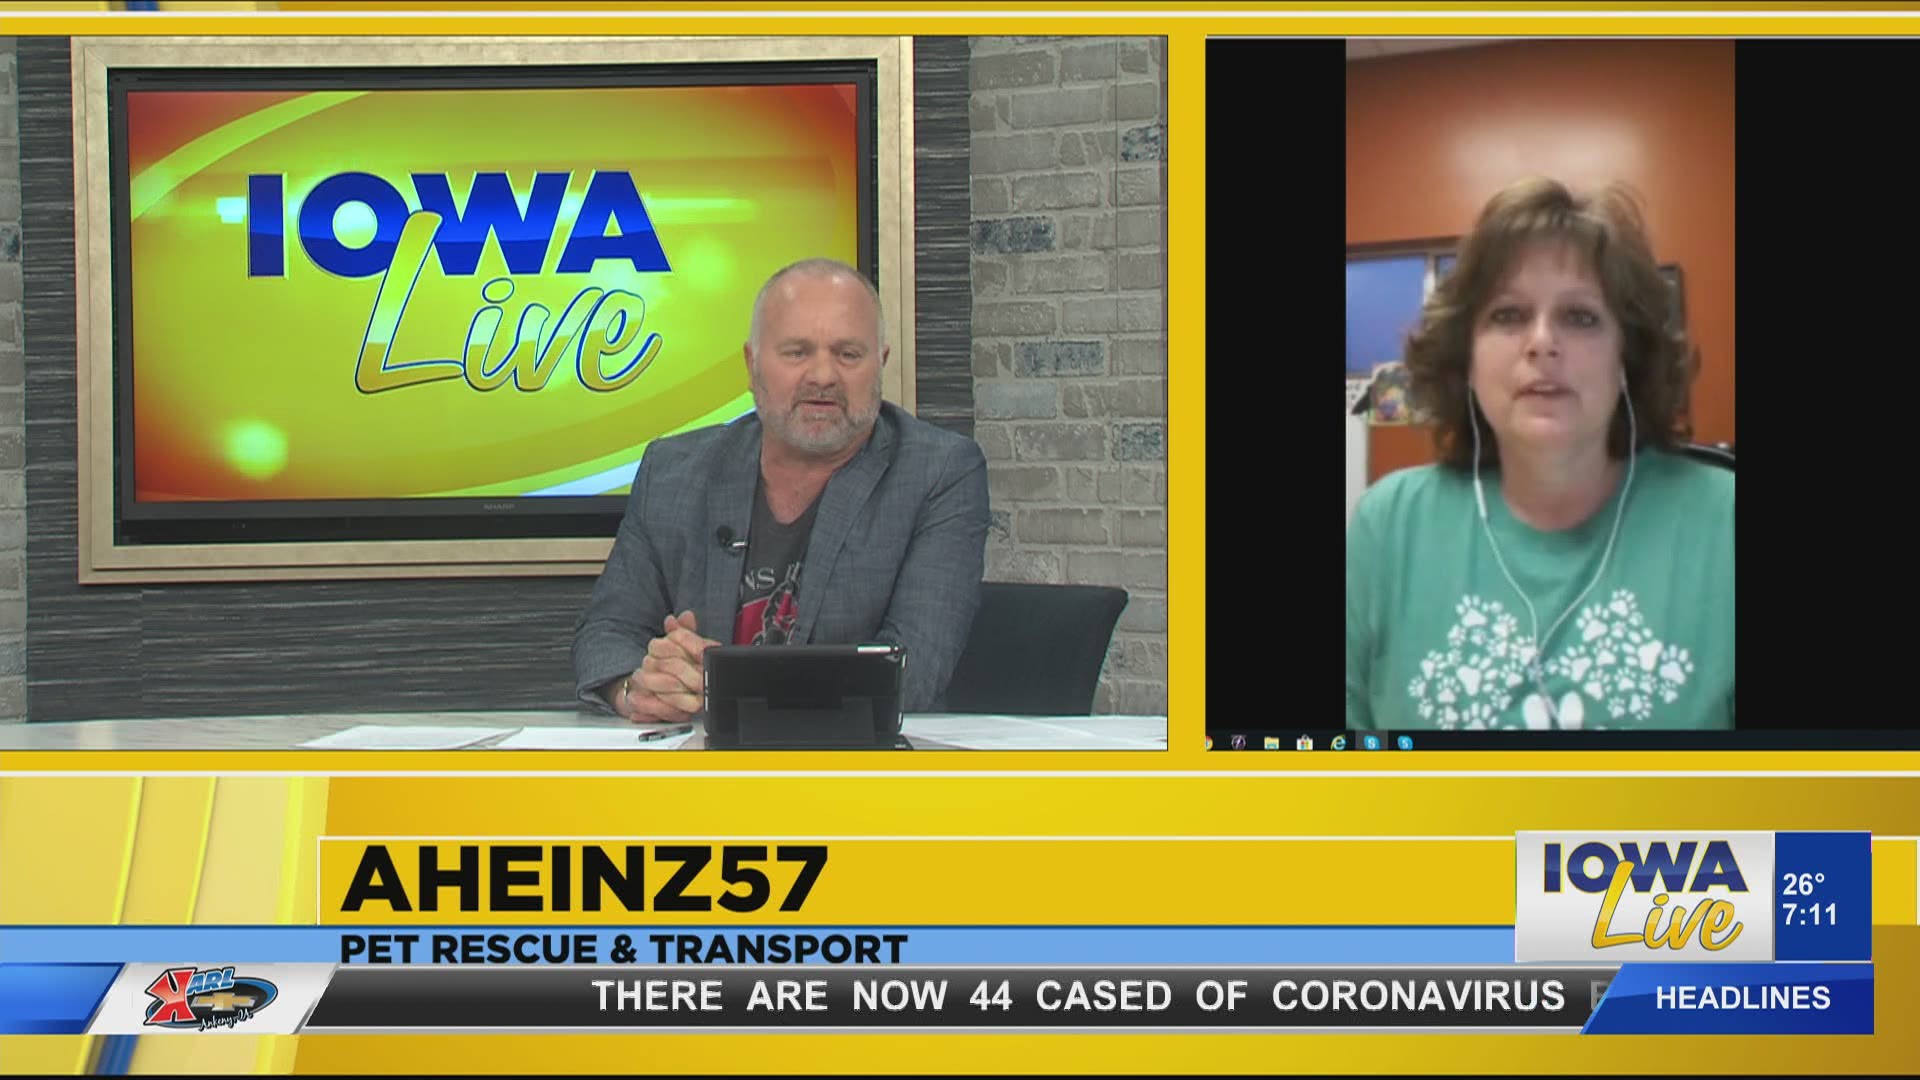 Lou talks with Amy Heinz with AHeinz57 about the coronavirus and pets